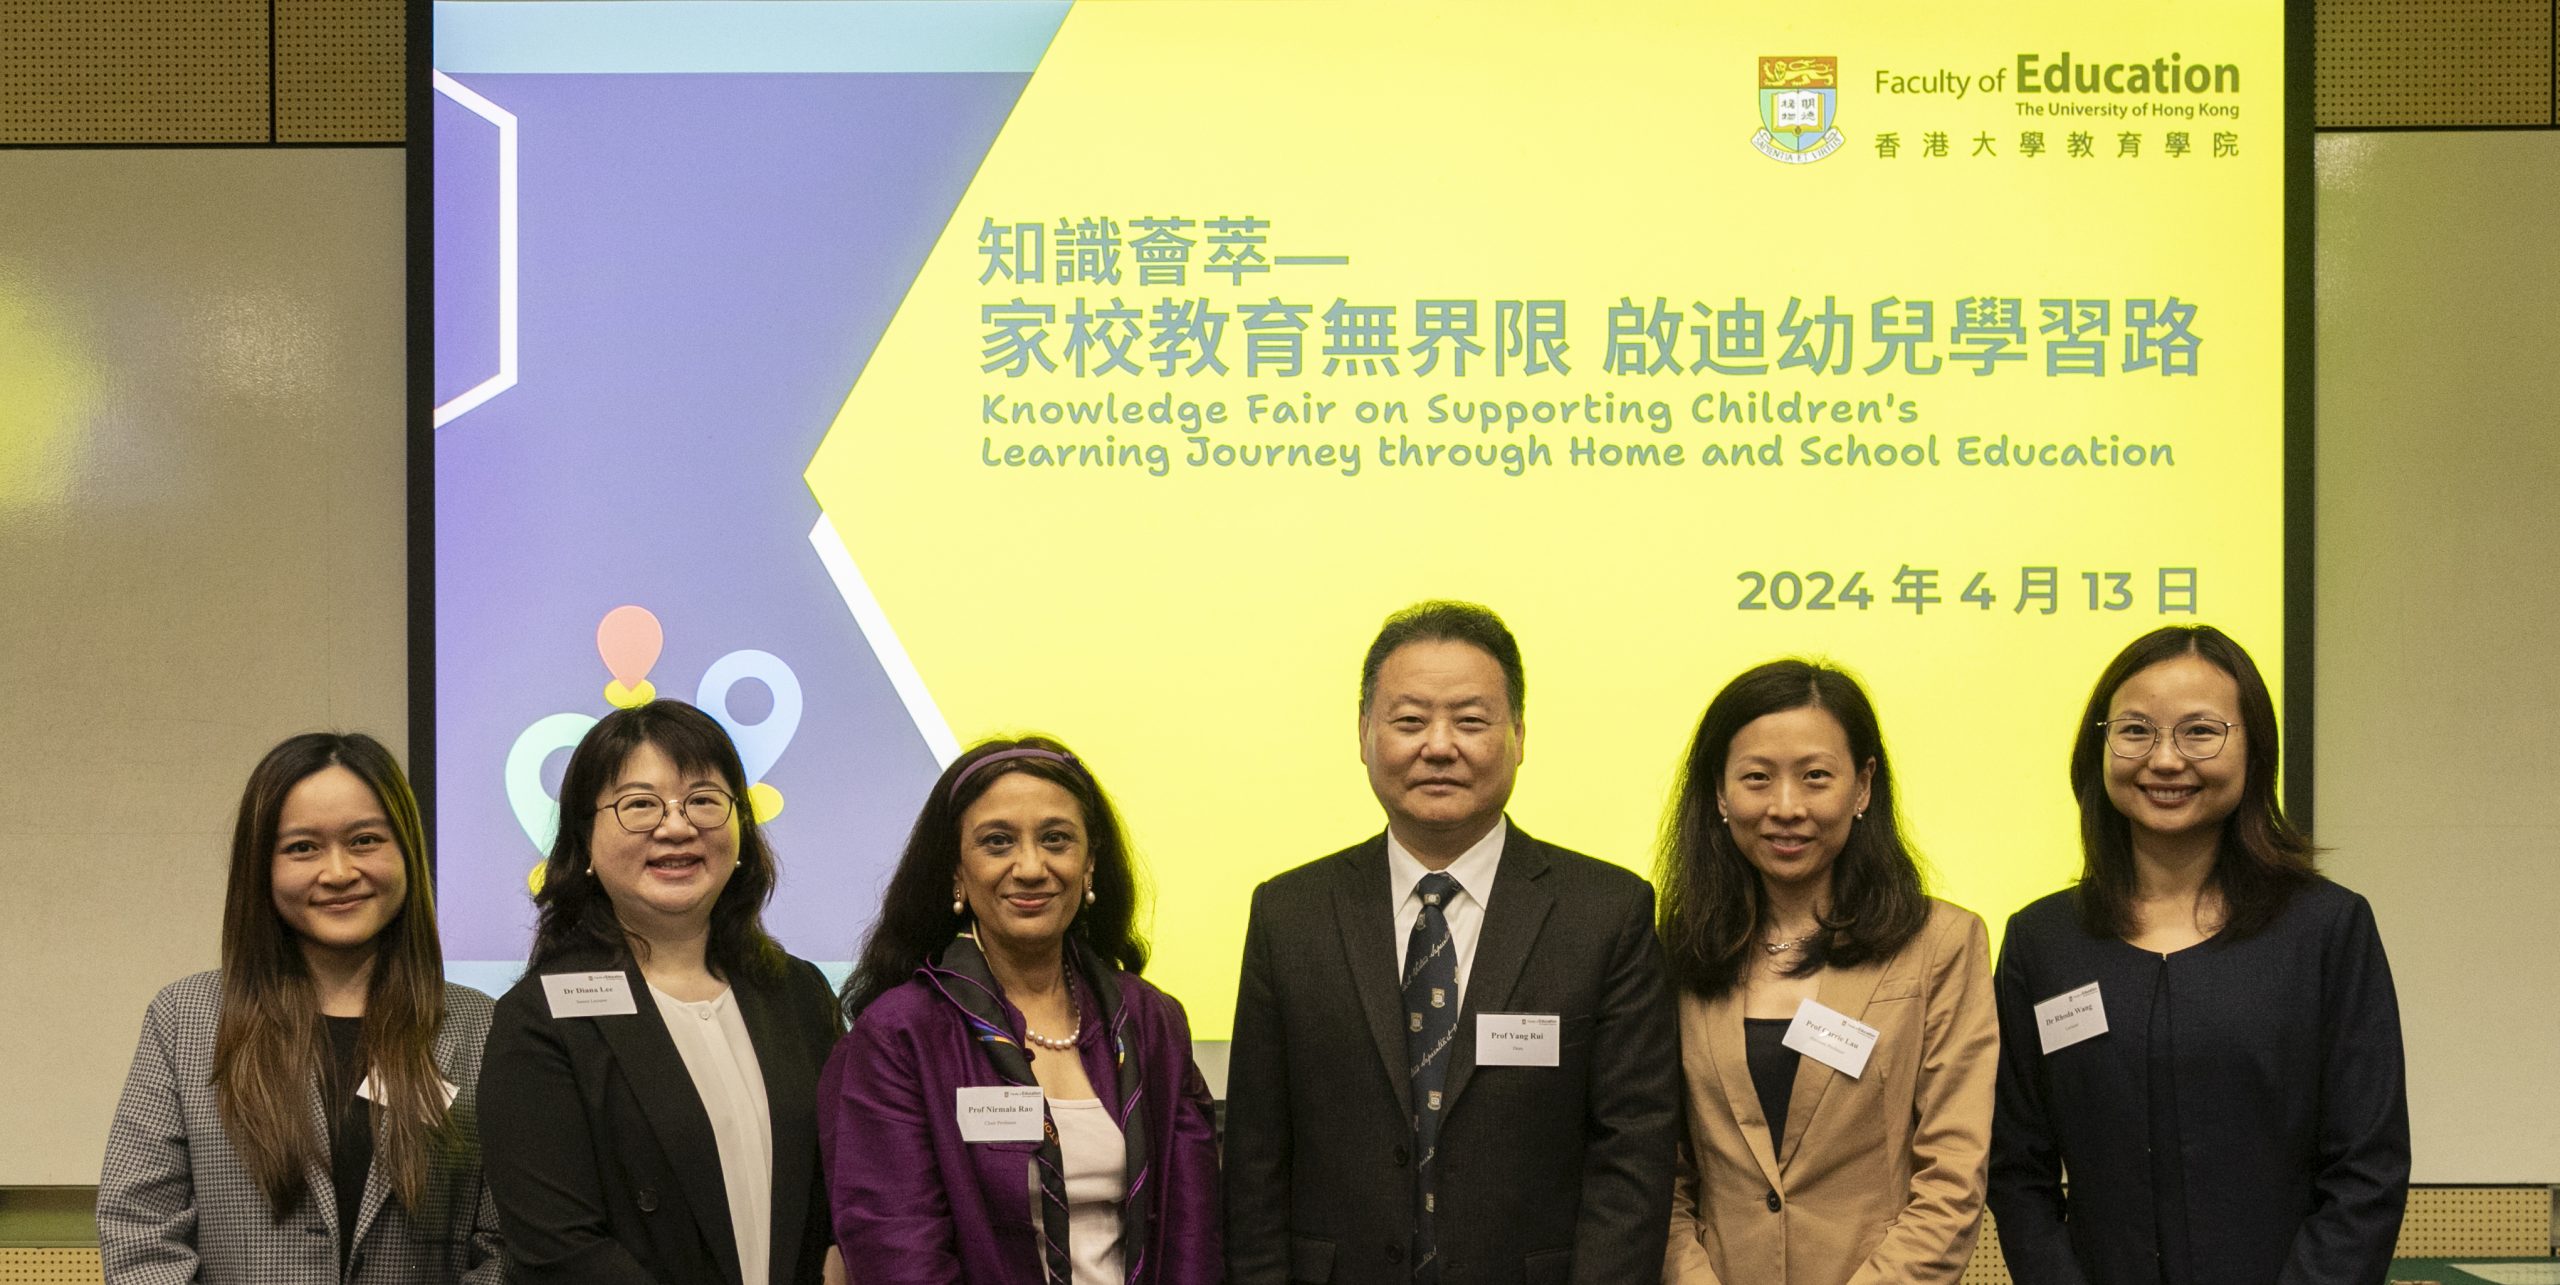 – Knowledge Fair: Supporting Children’s Learning Journey Through Home and School Education